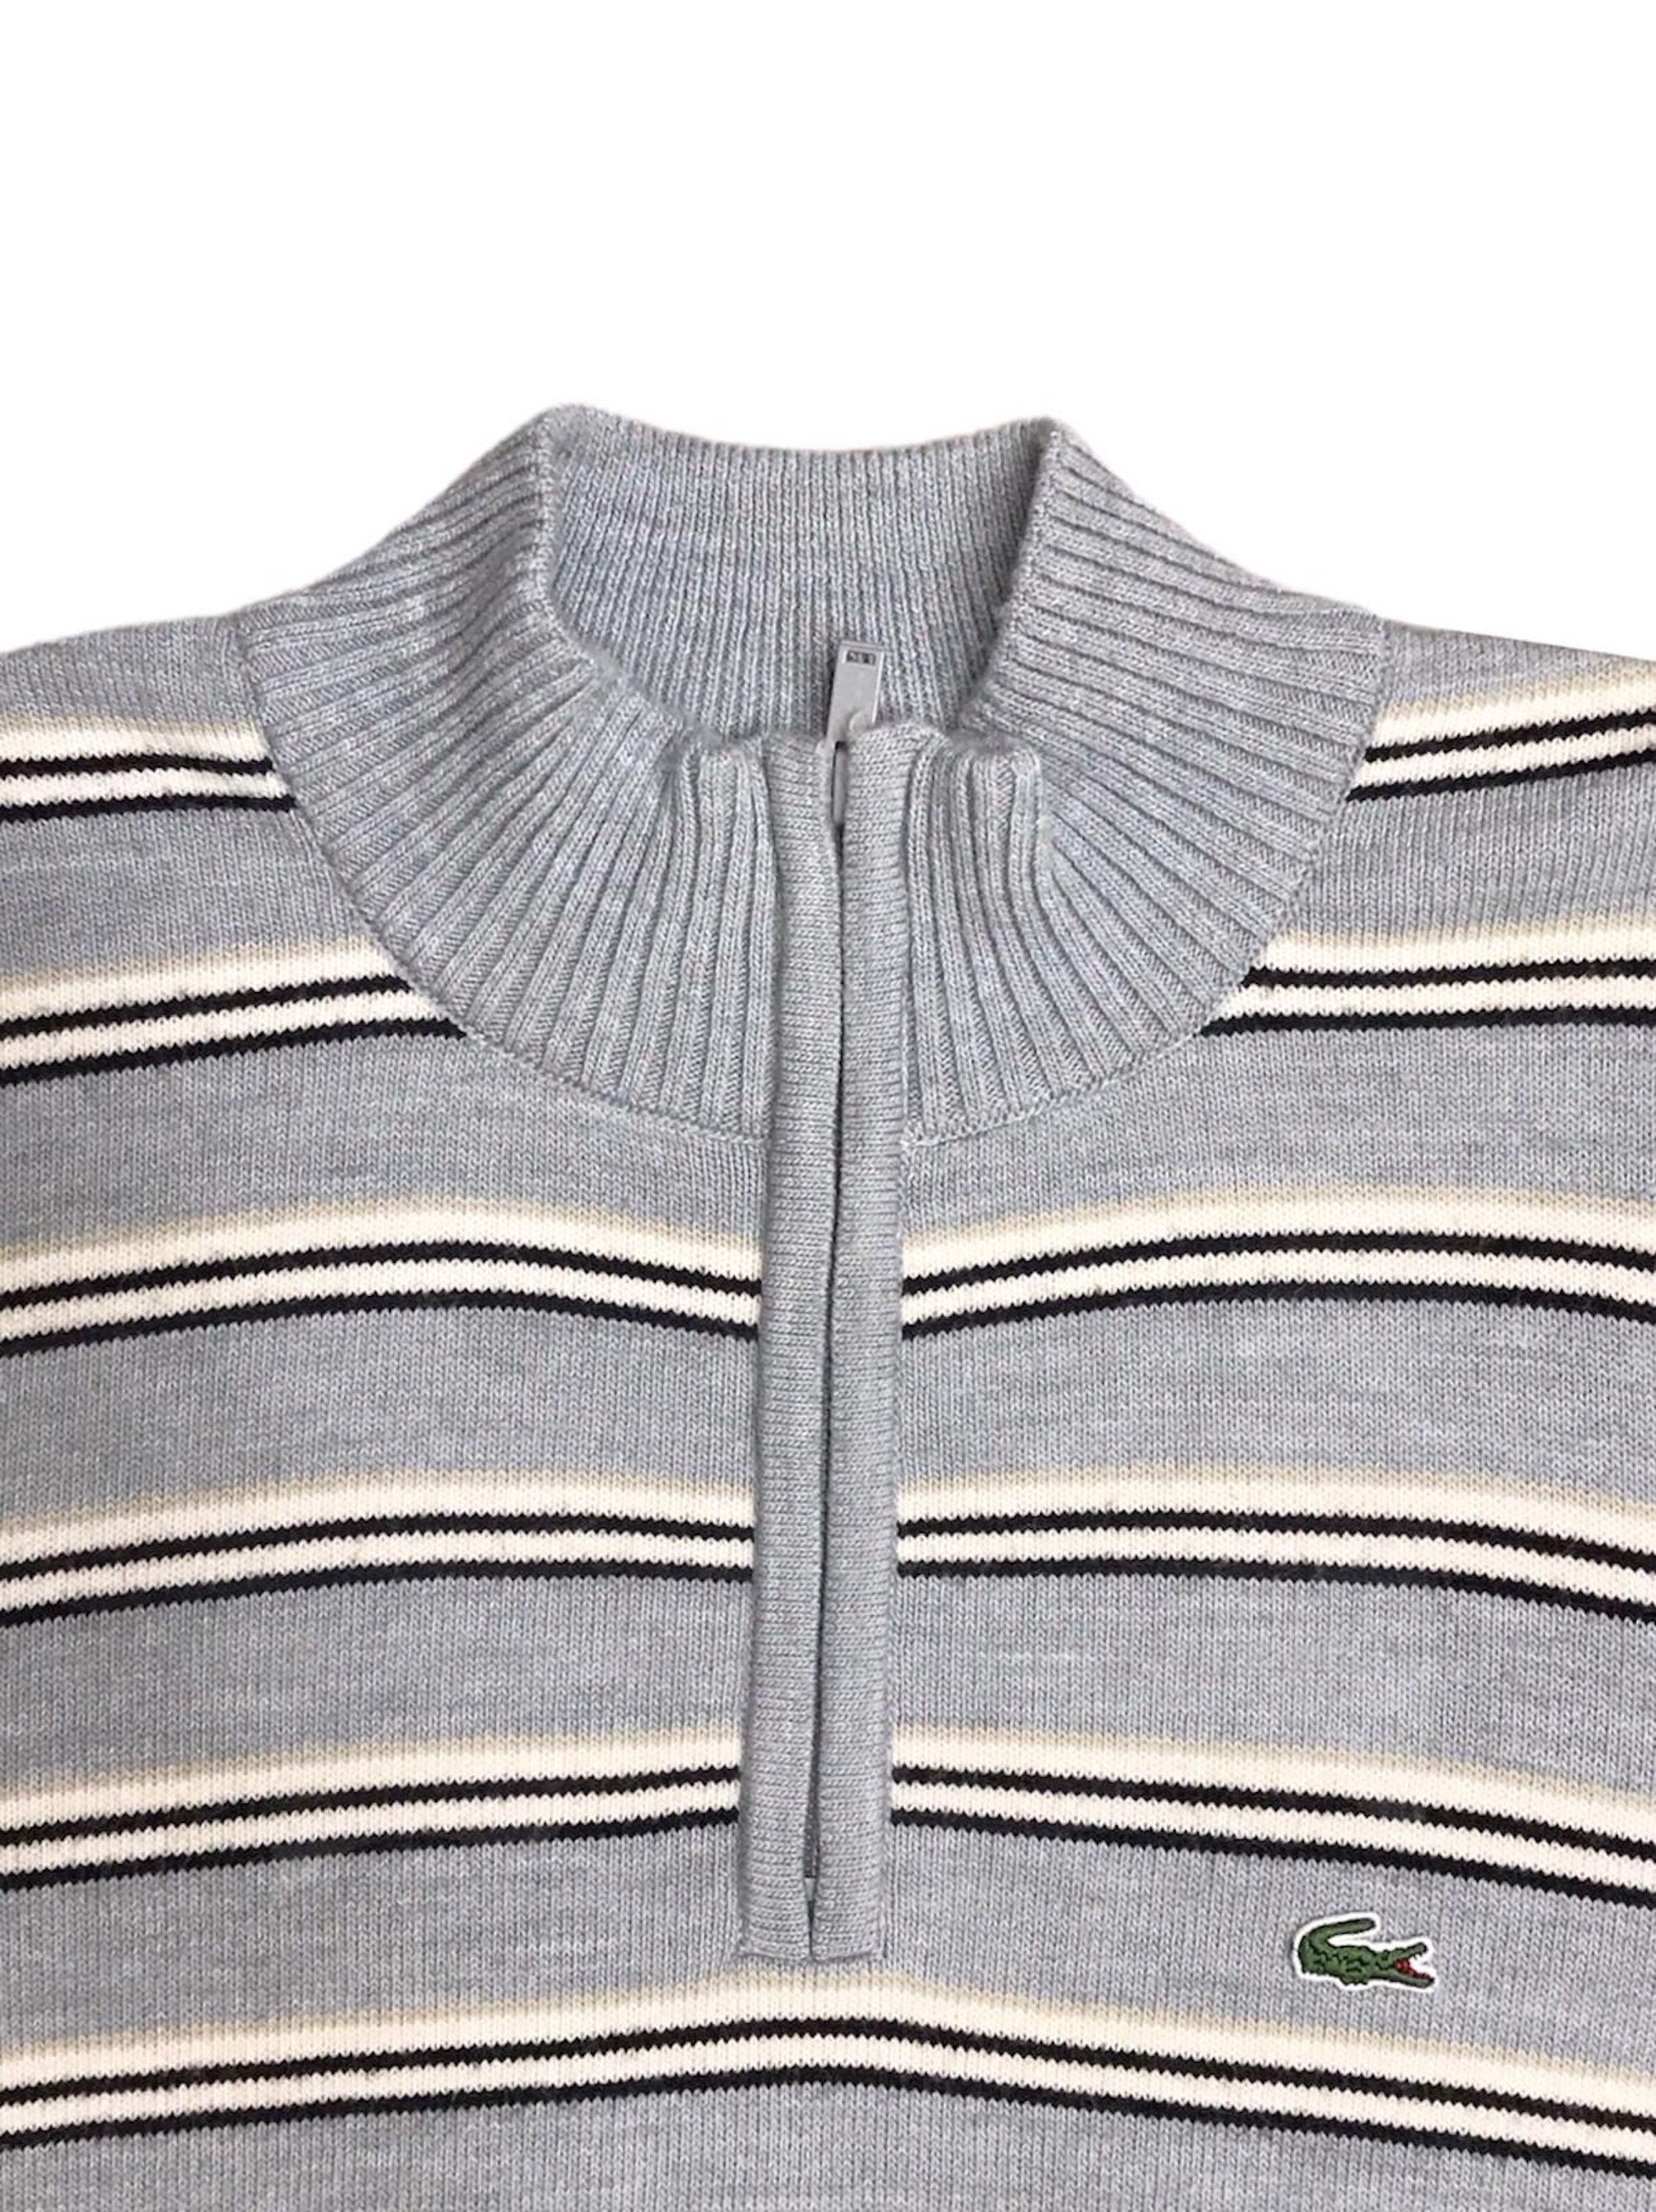 LACOSTE Vintage 1/4 Zip Wool Mix Knitted Striped Jumper | Etsy